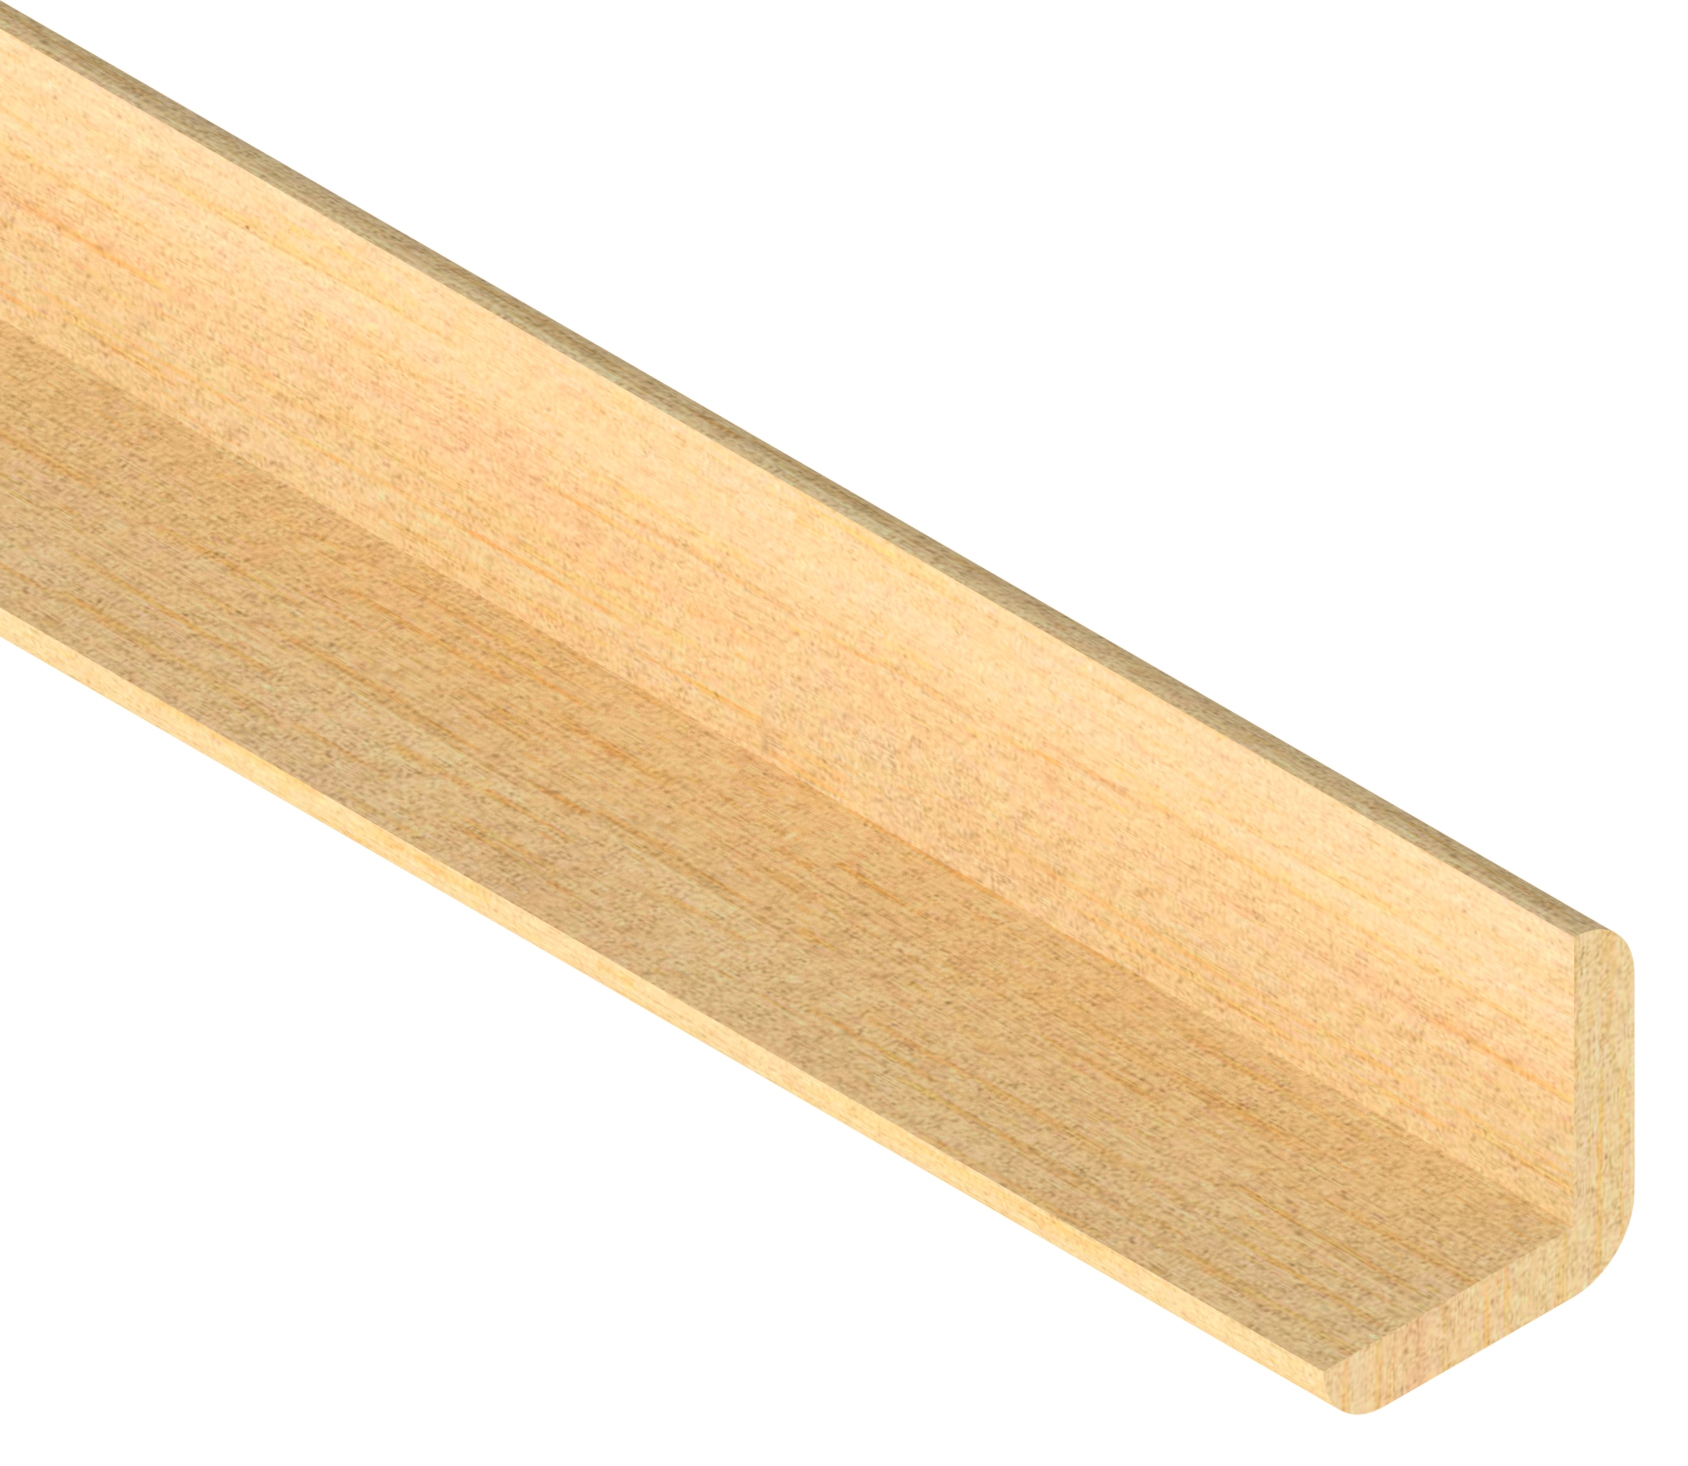 Image of Cheshire Mouldings Pine Angle - 25x25x2400mm